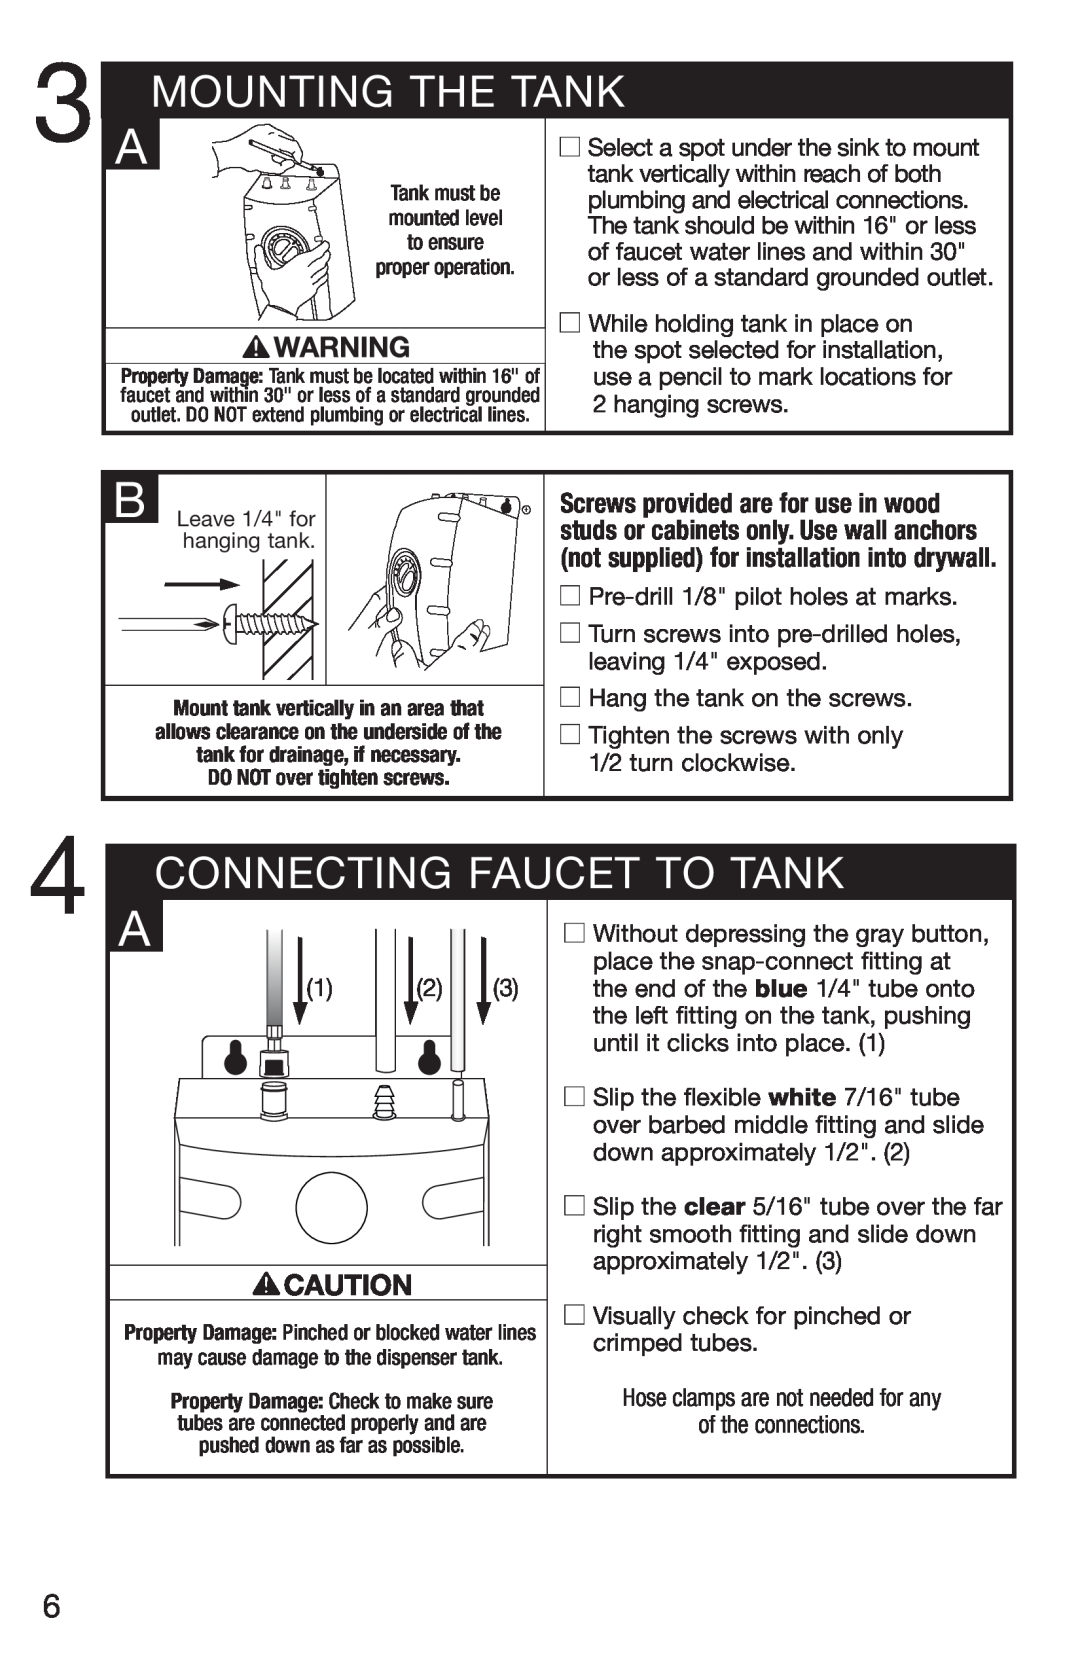 Emerson UWL owner manual Mounting The Tank, Connecting Faucet To Tank 